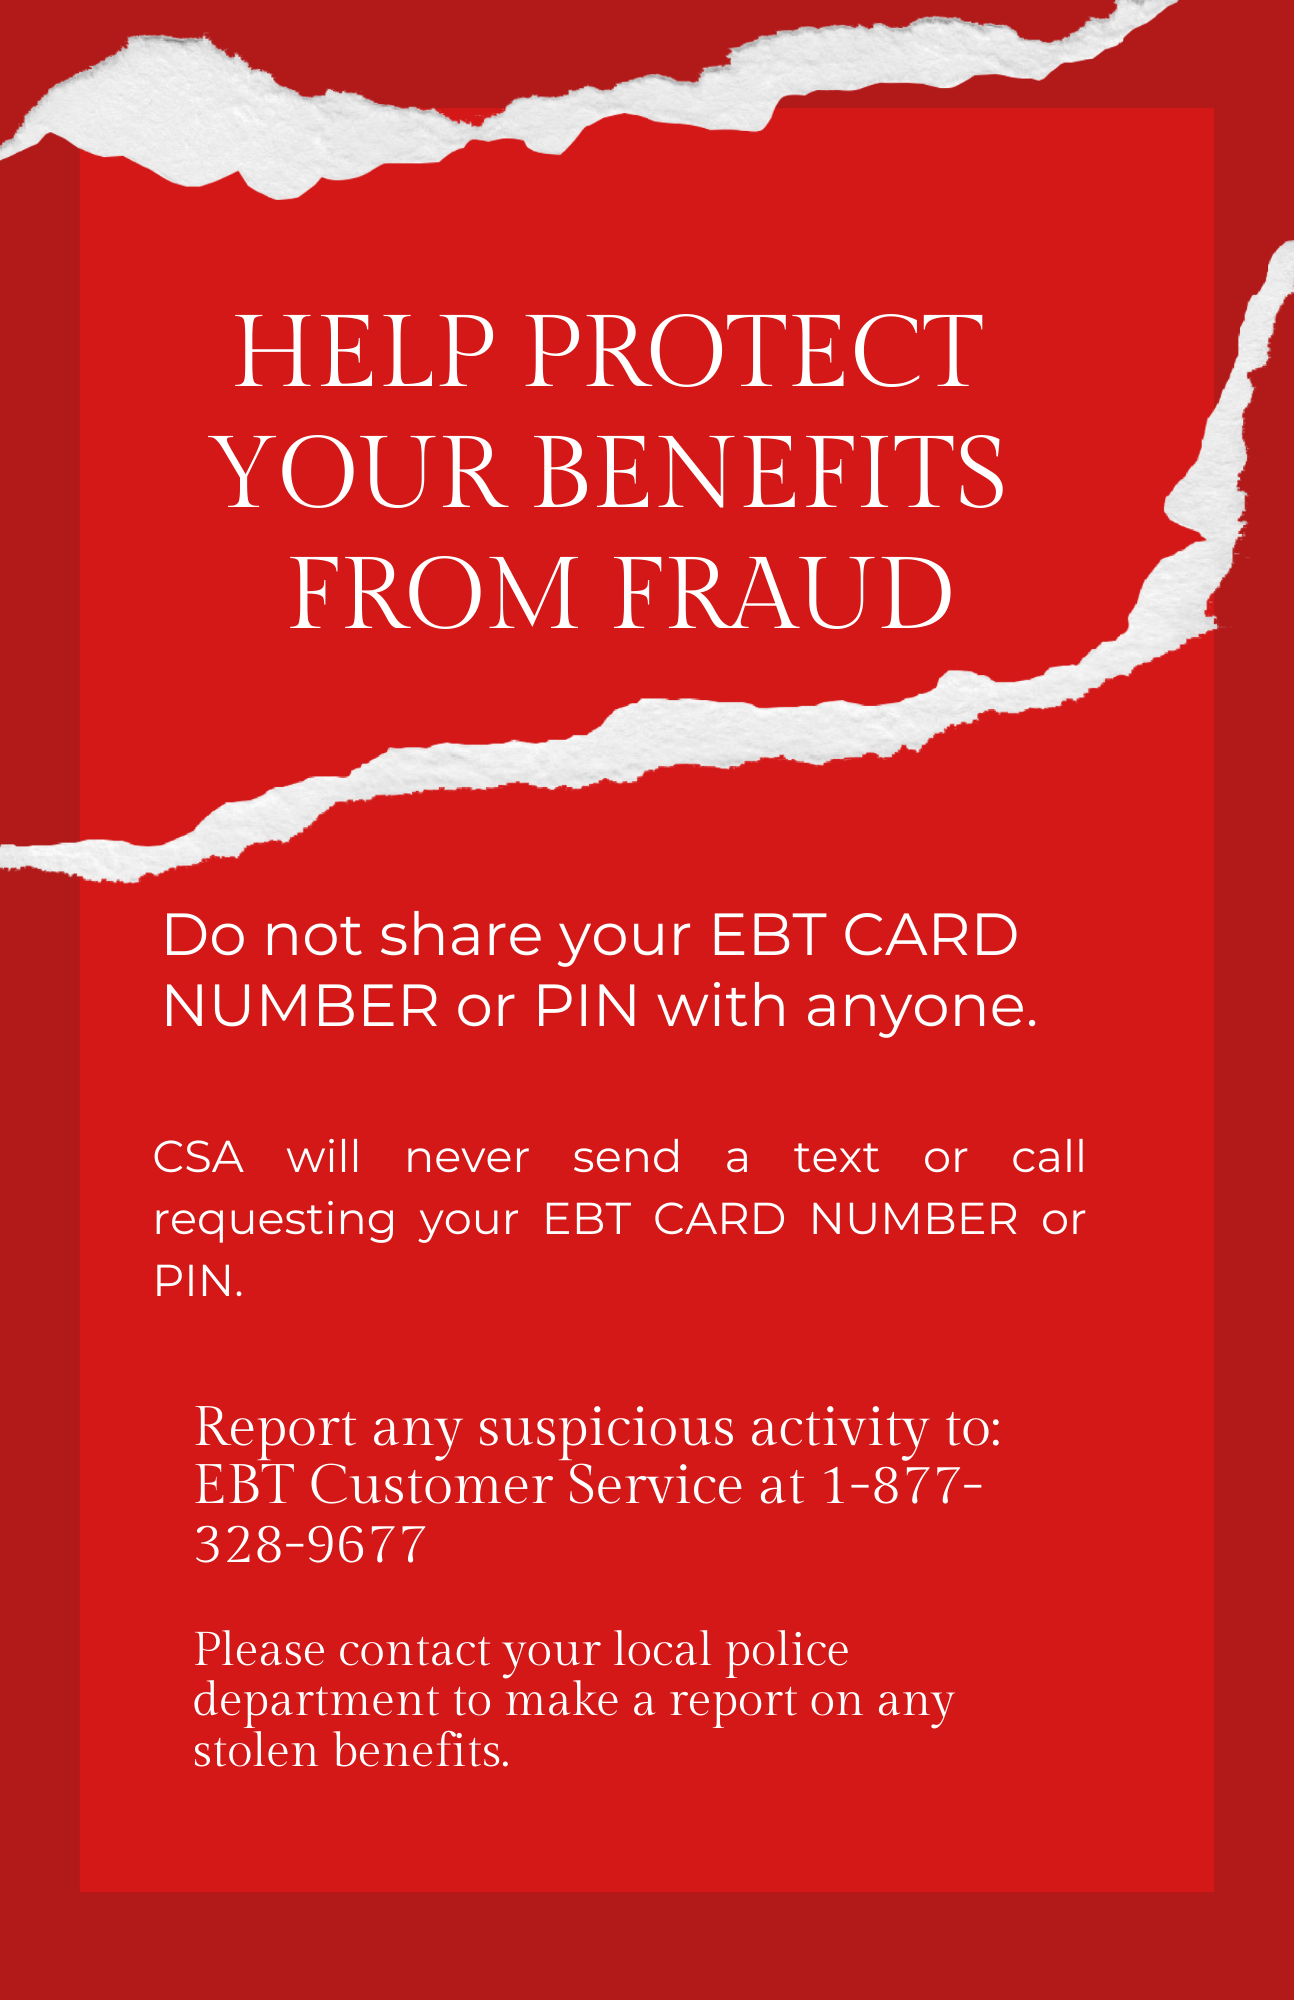 EBT Fraud Alert: Do not share your EBT card number or PIN with anyone